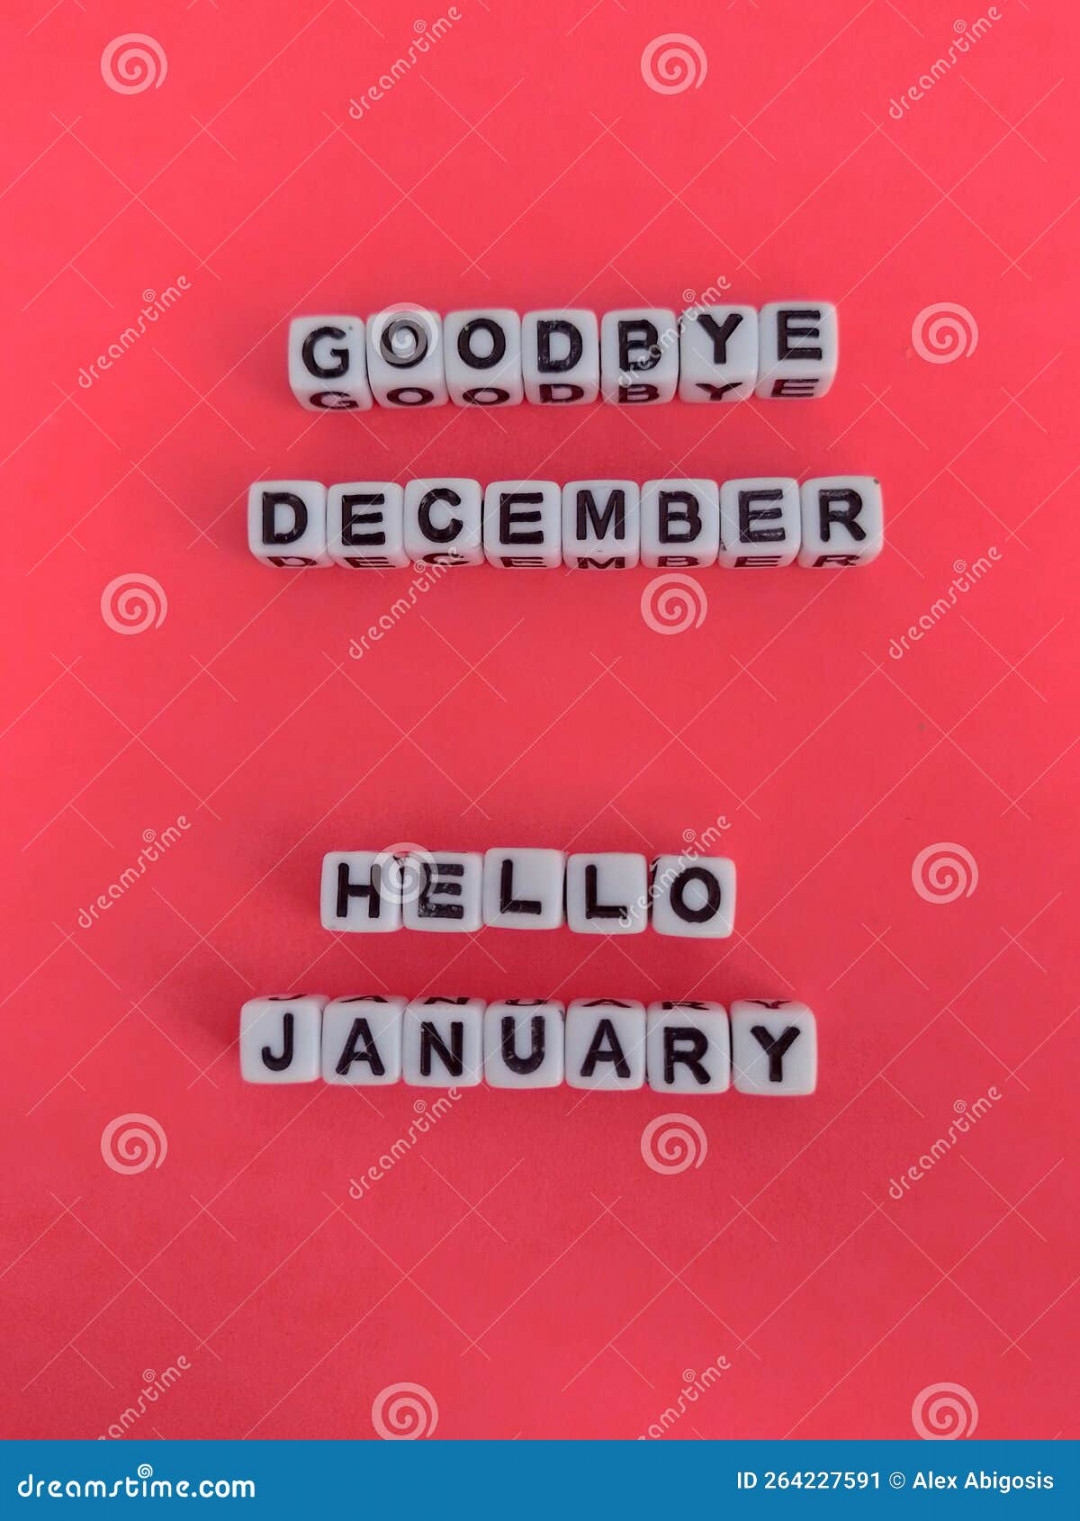 Goodbye December Hello January Sign on a Pink Background Stock